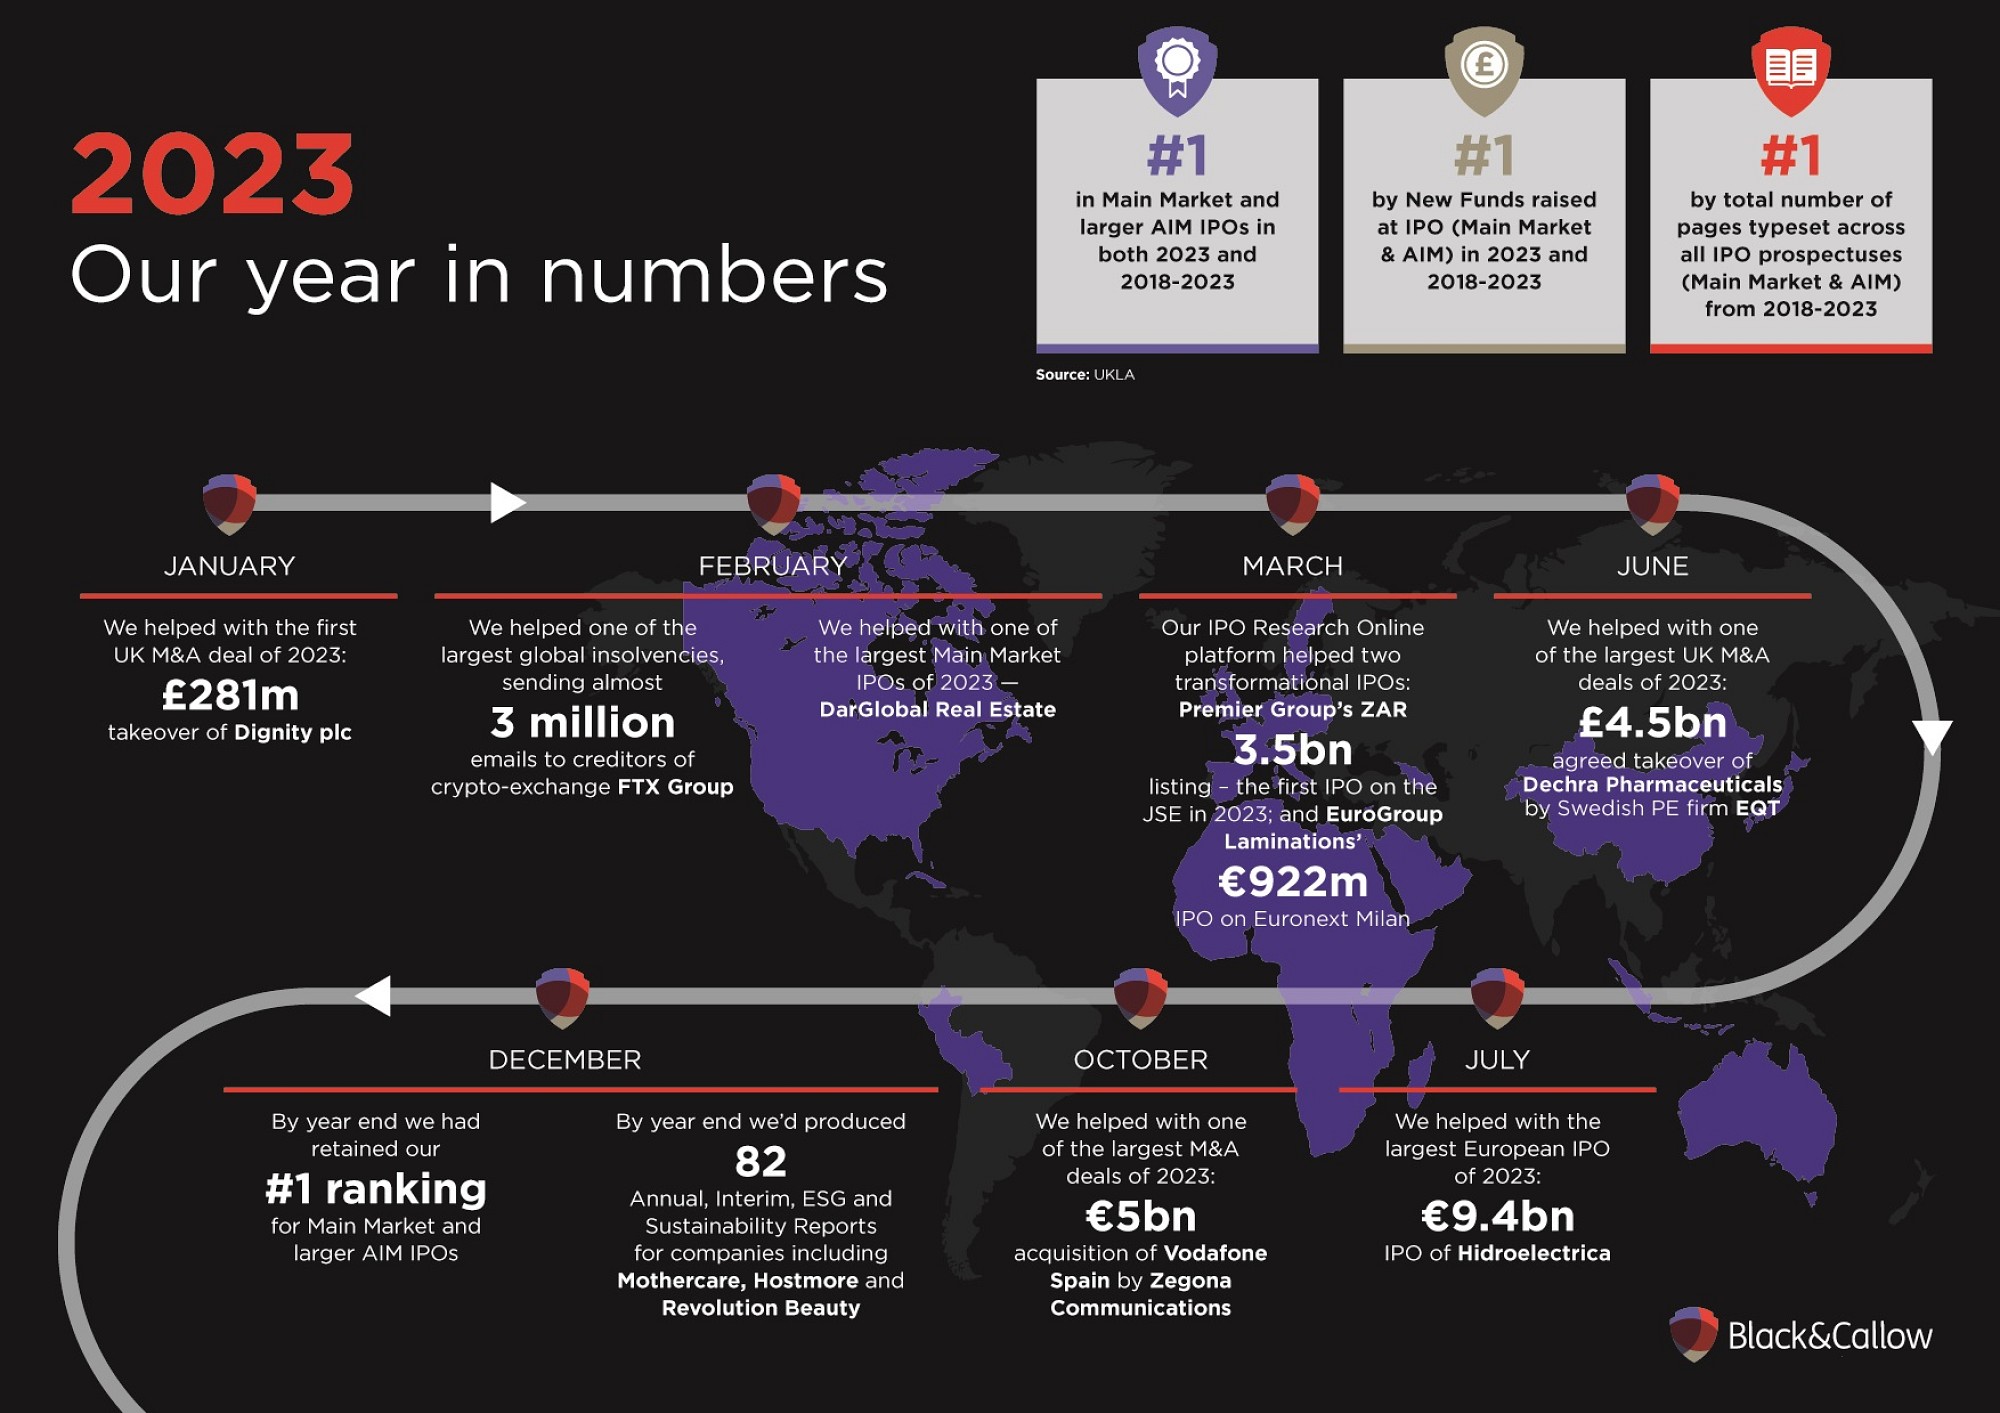 2023: our year in numbers